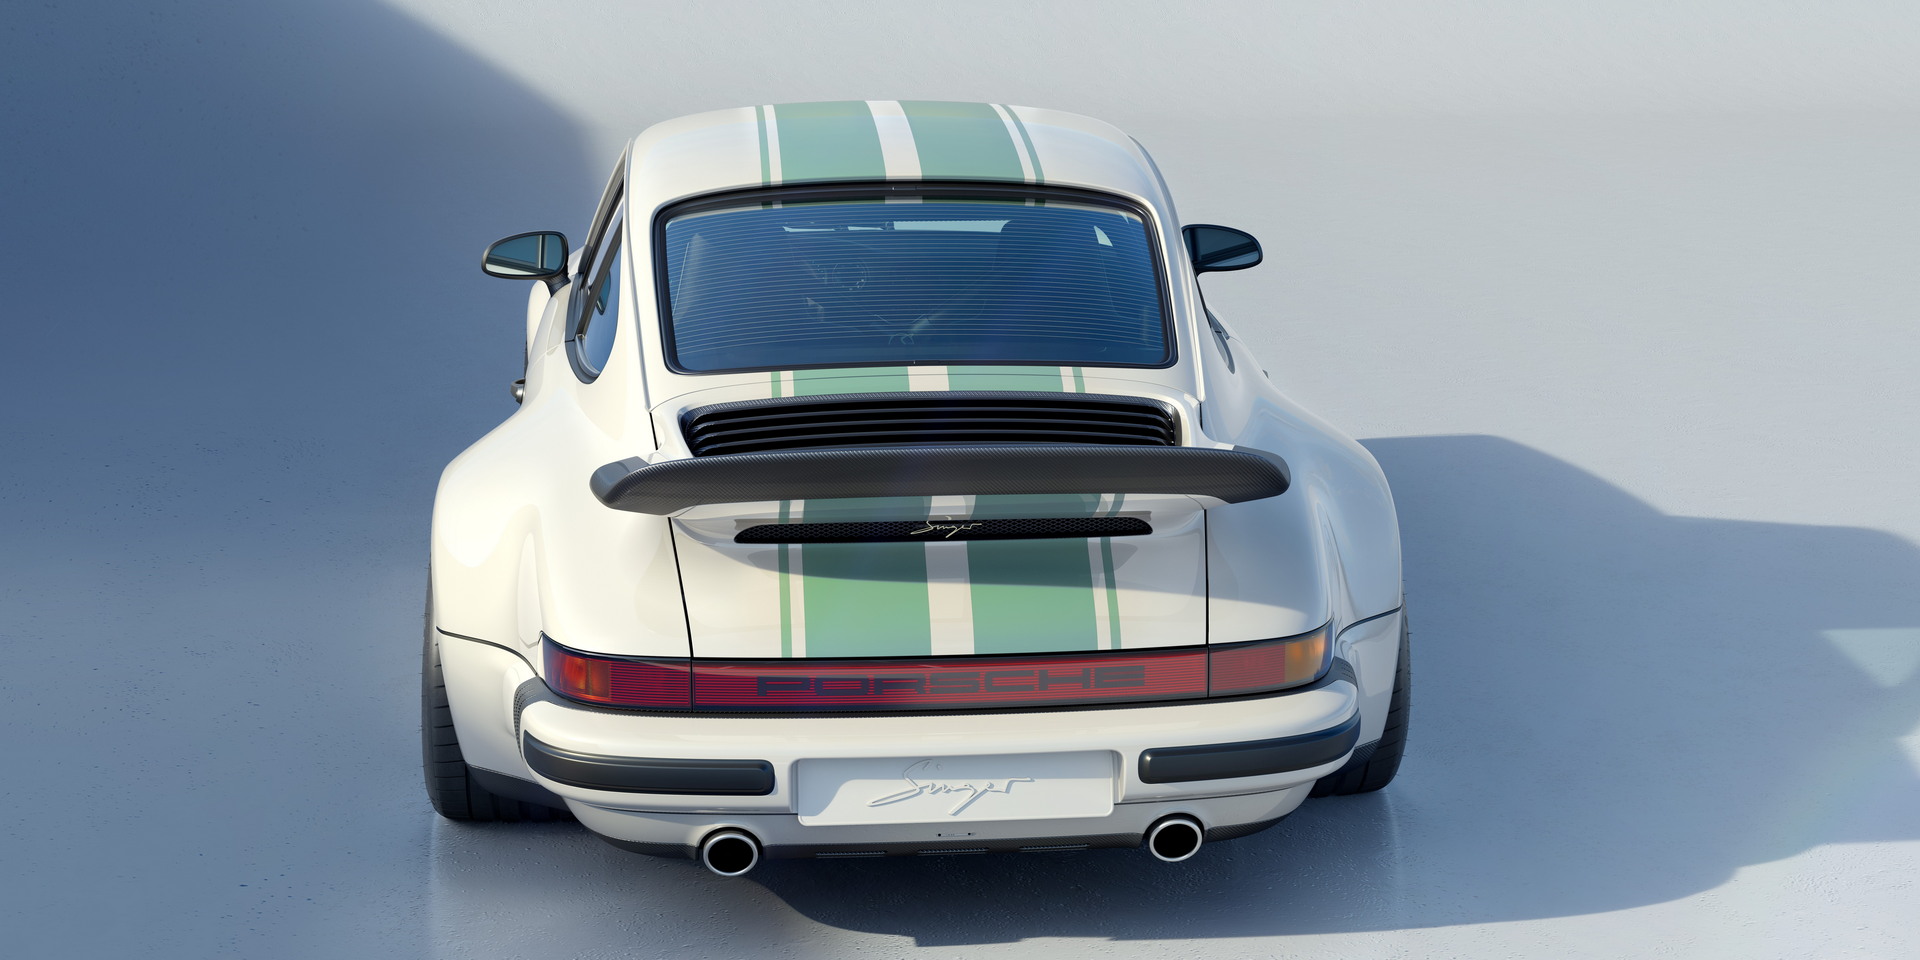 Singer's First Road-Going Reimagined Porsche 911 Turbo Has Us